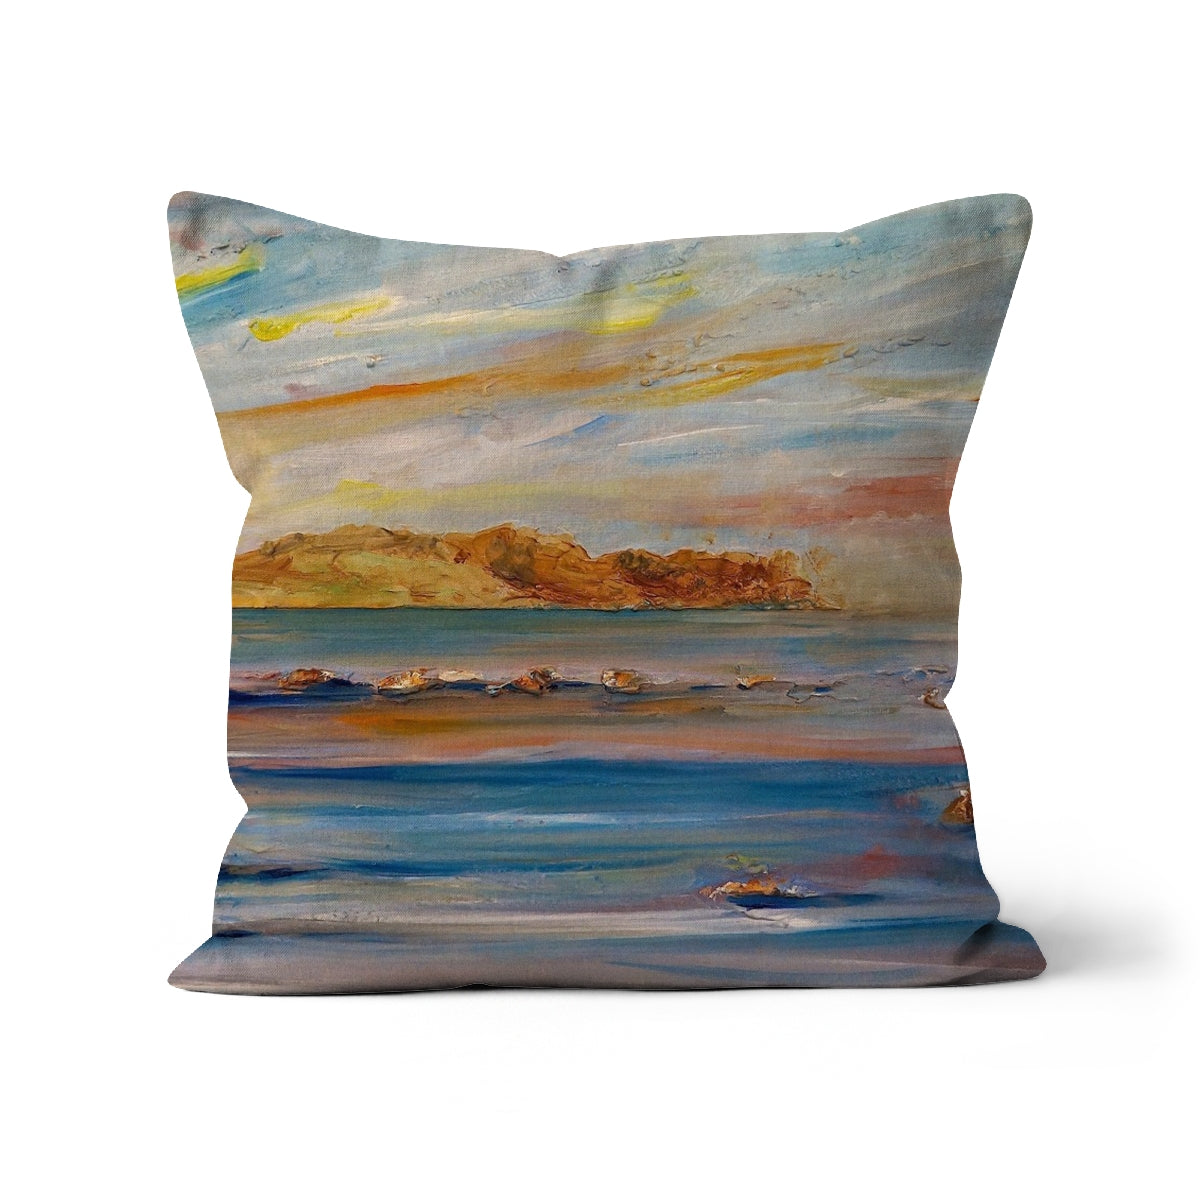 Tiree Dawn Art Gifts Cushion-Cushions-Hebridean Islands Art Gallery-Linen-12"x12"-Paintings, Prints, Homeware, Art Gifts From Scotland By Scottish Artist Kevin Hunter